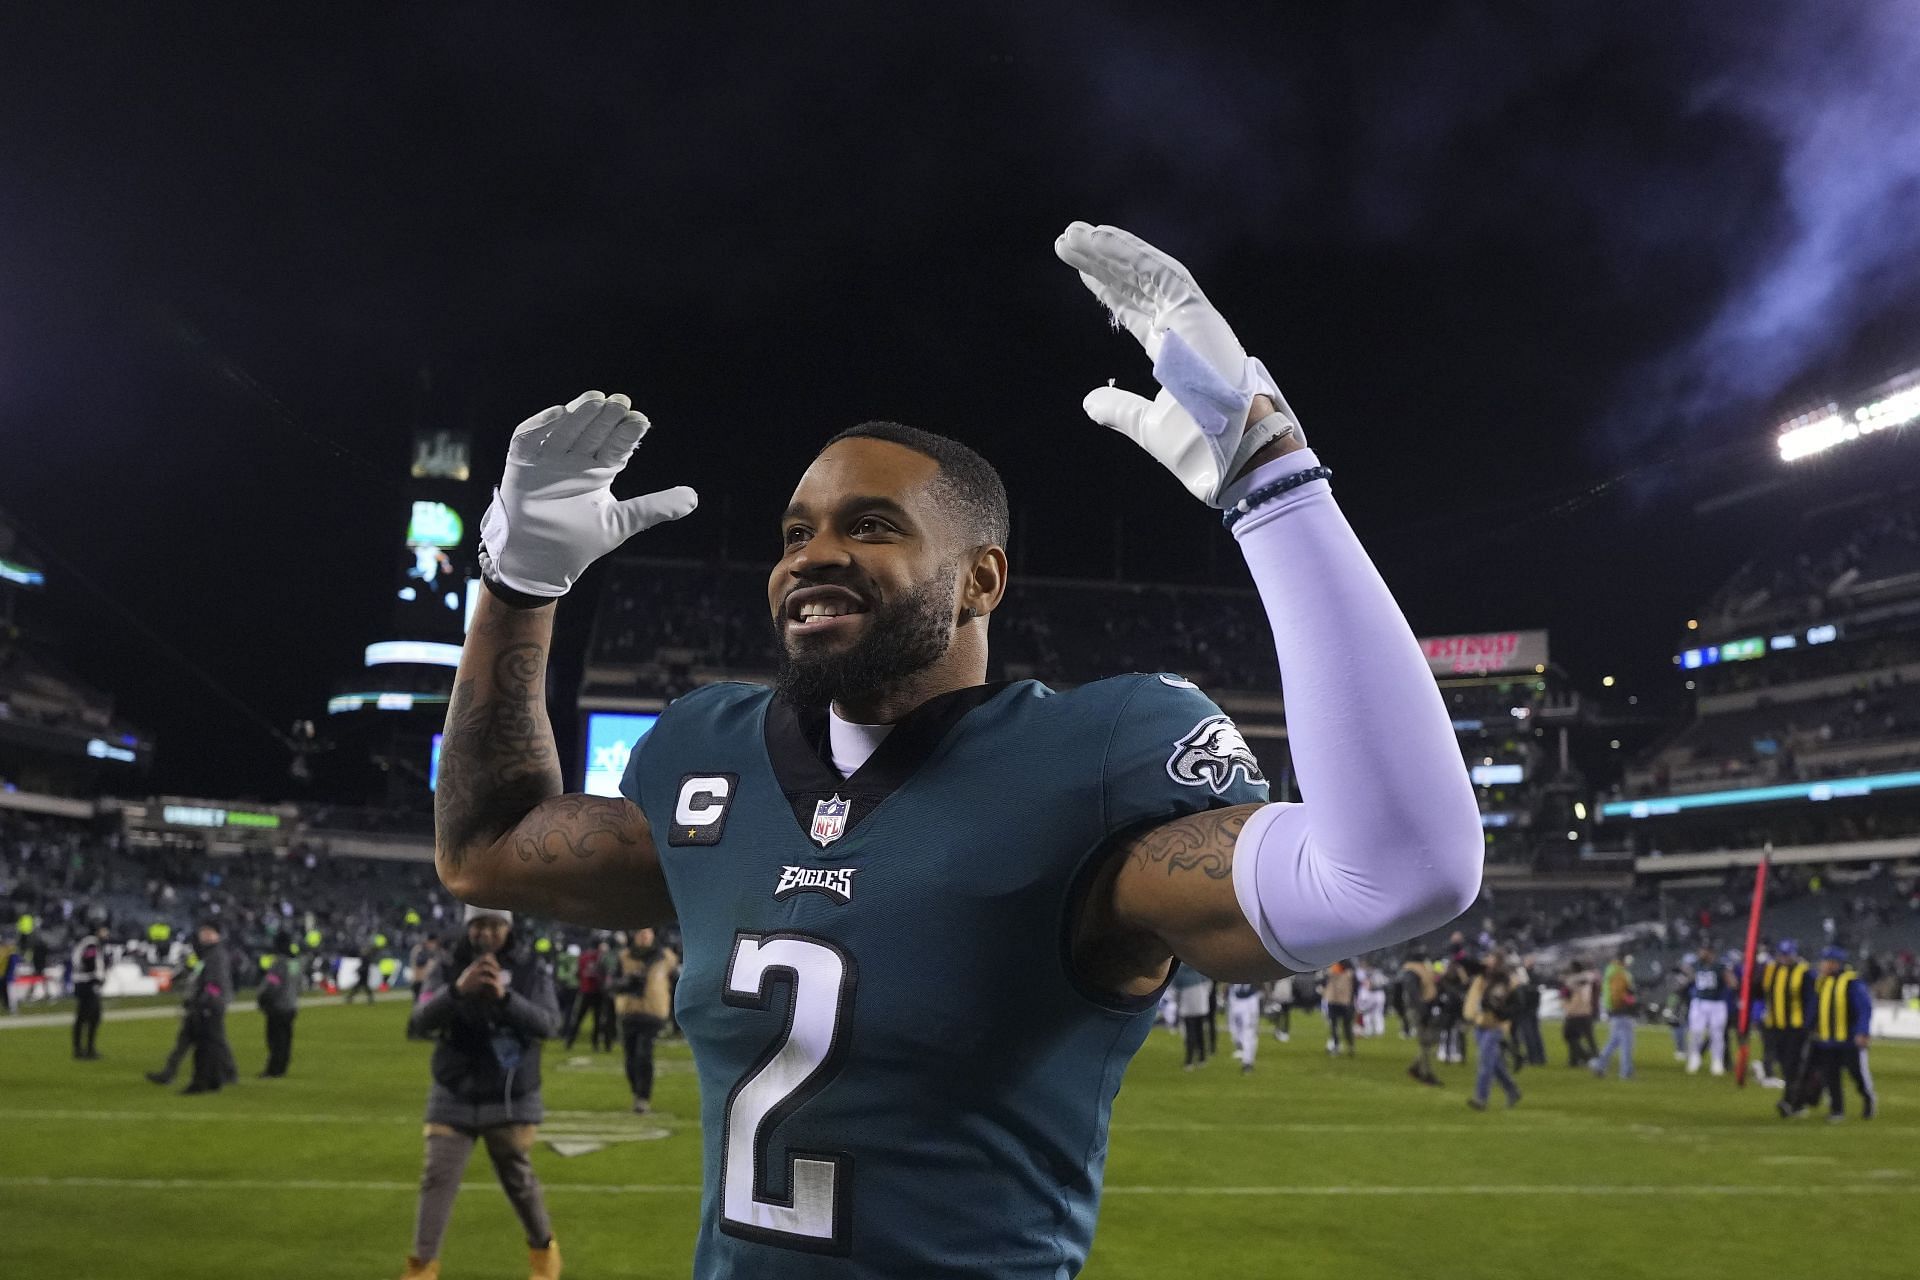 Darius Slay is back for another run with the Eagles